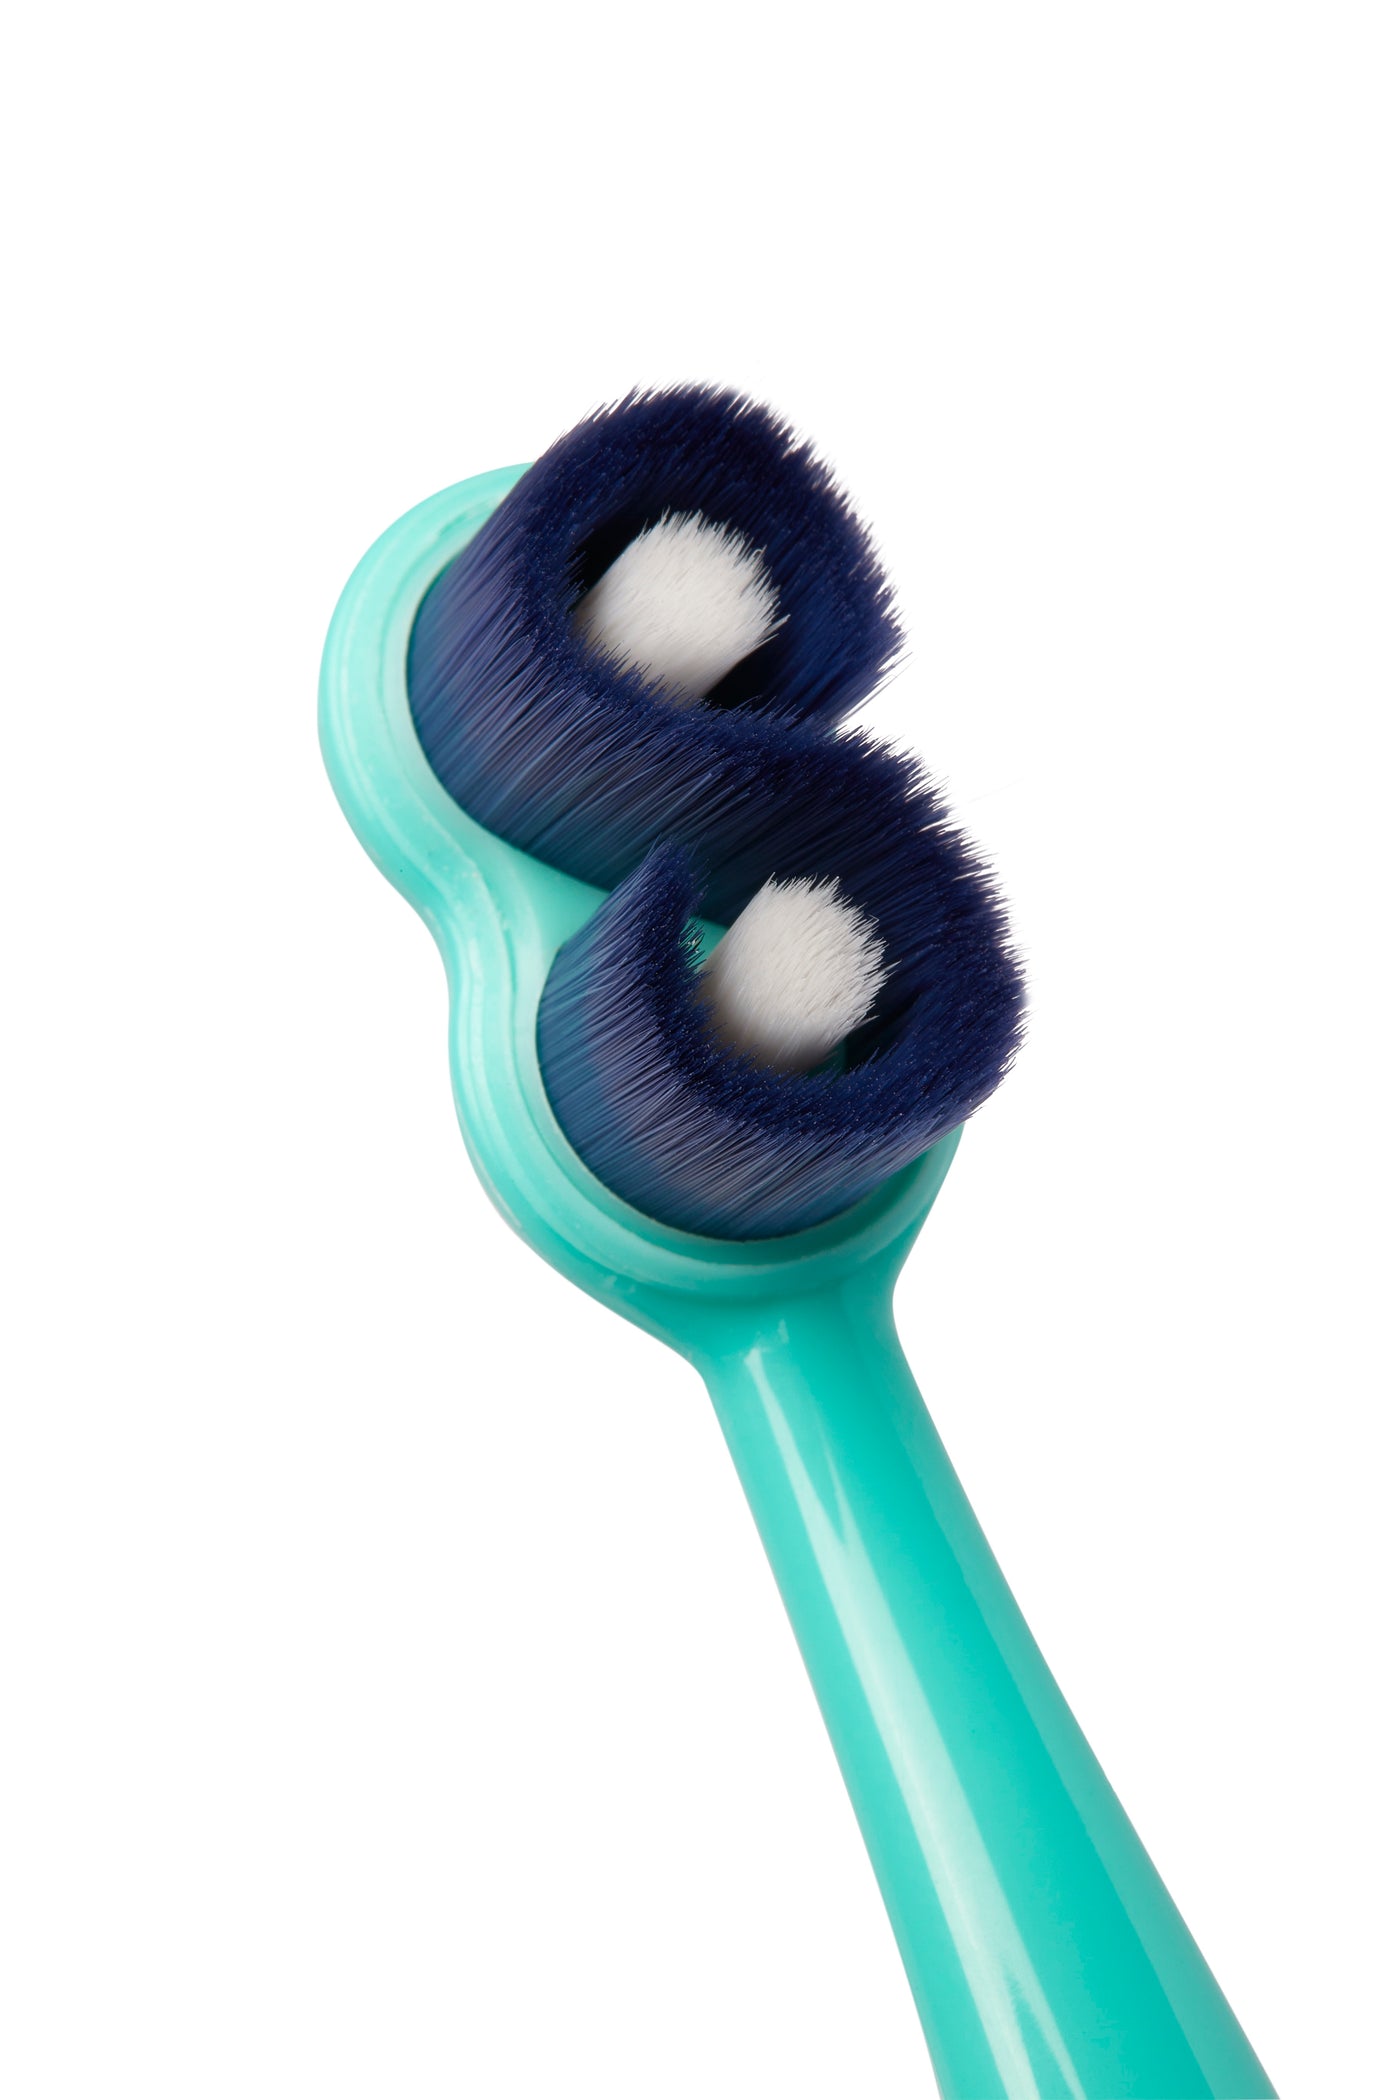 Superbrush manual toothbrush for Teens & Adults